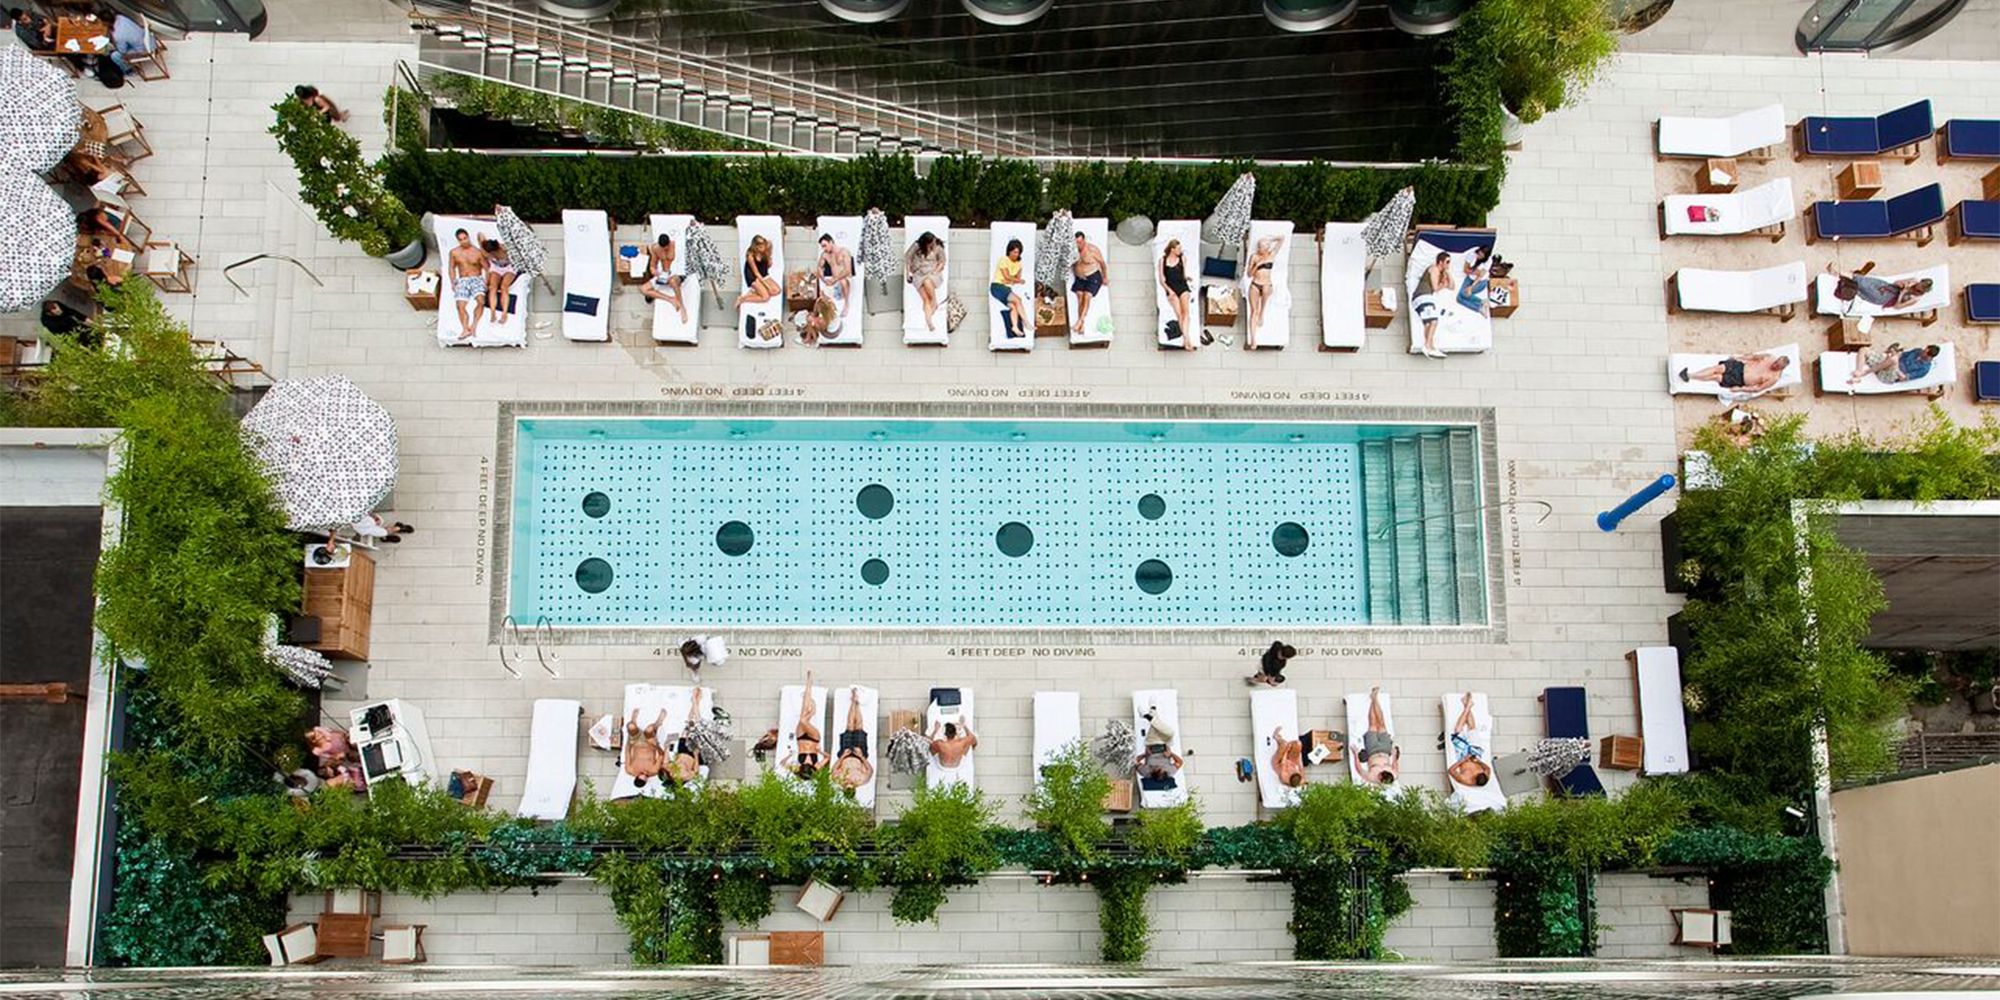 Rooftop Pools Open To Public In New York, Pool City Bar Stools